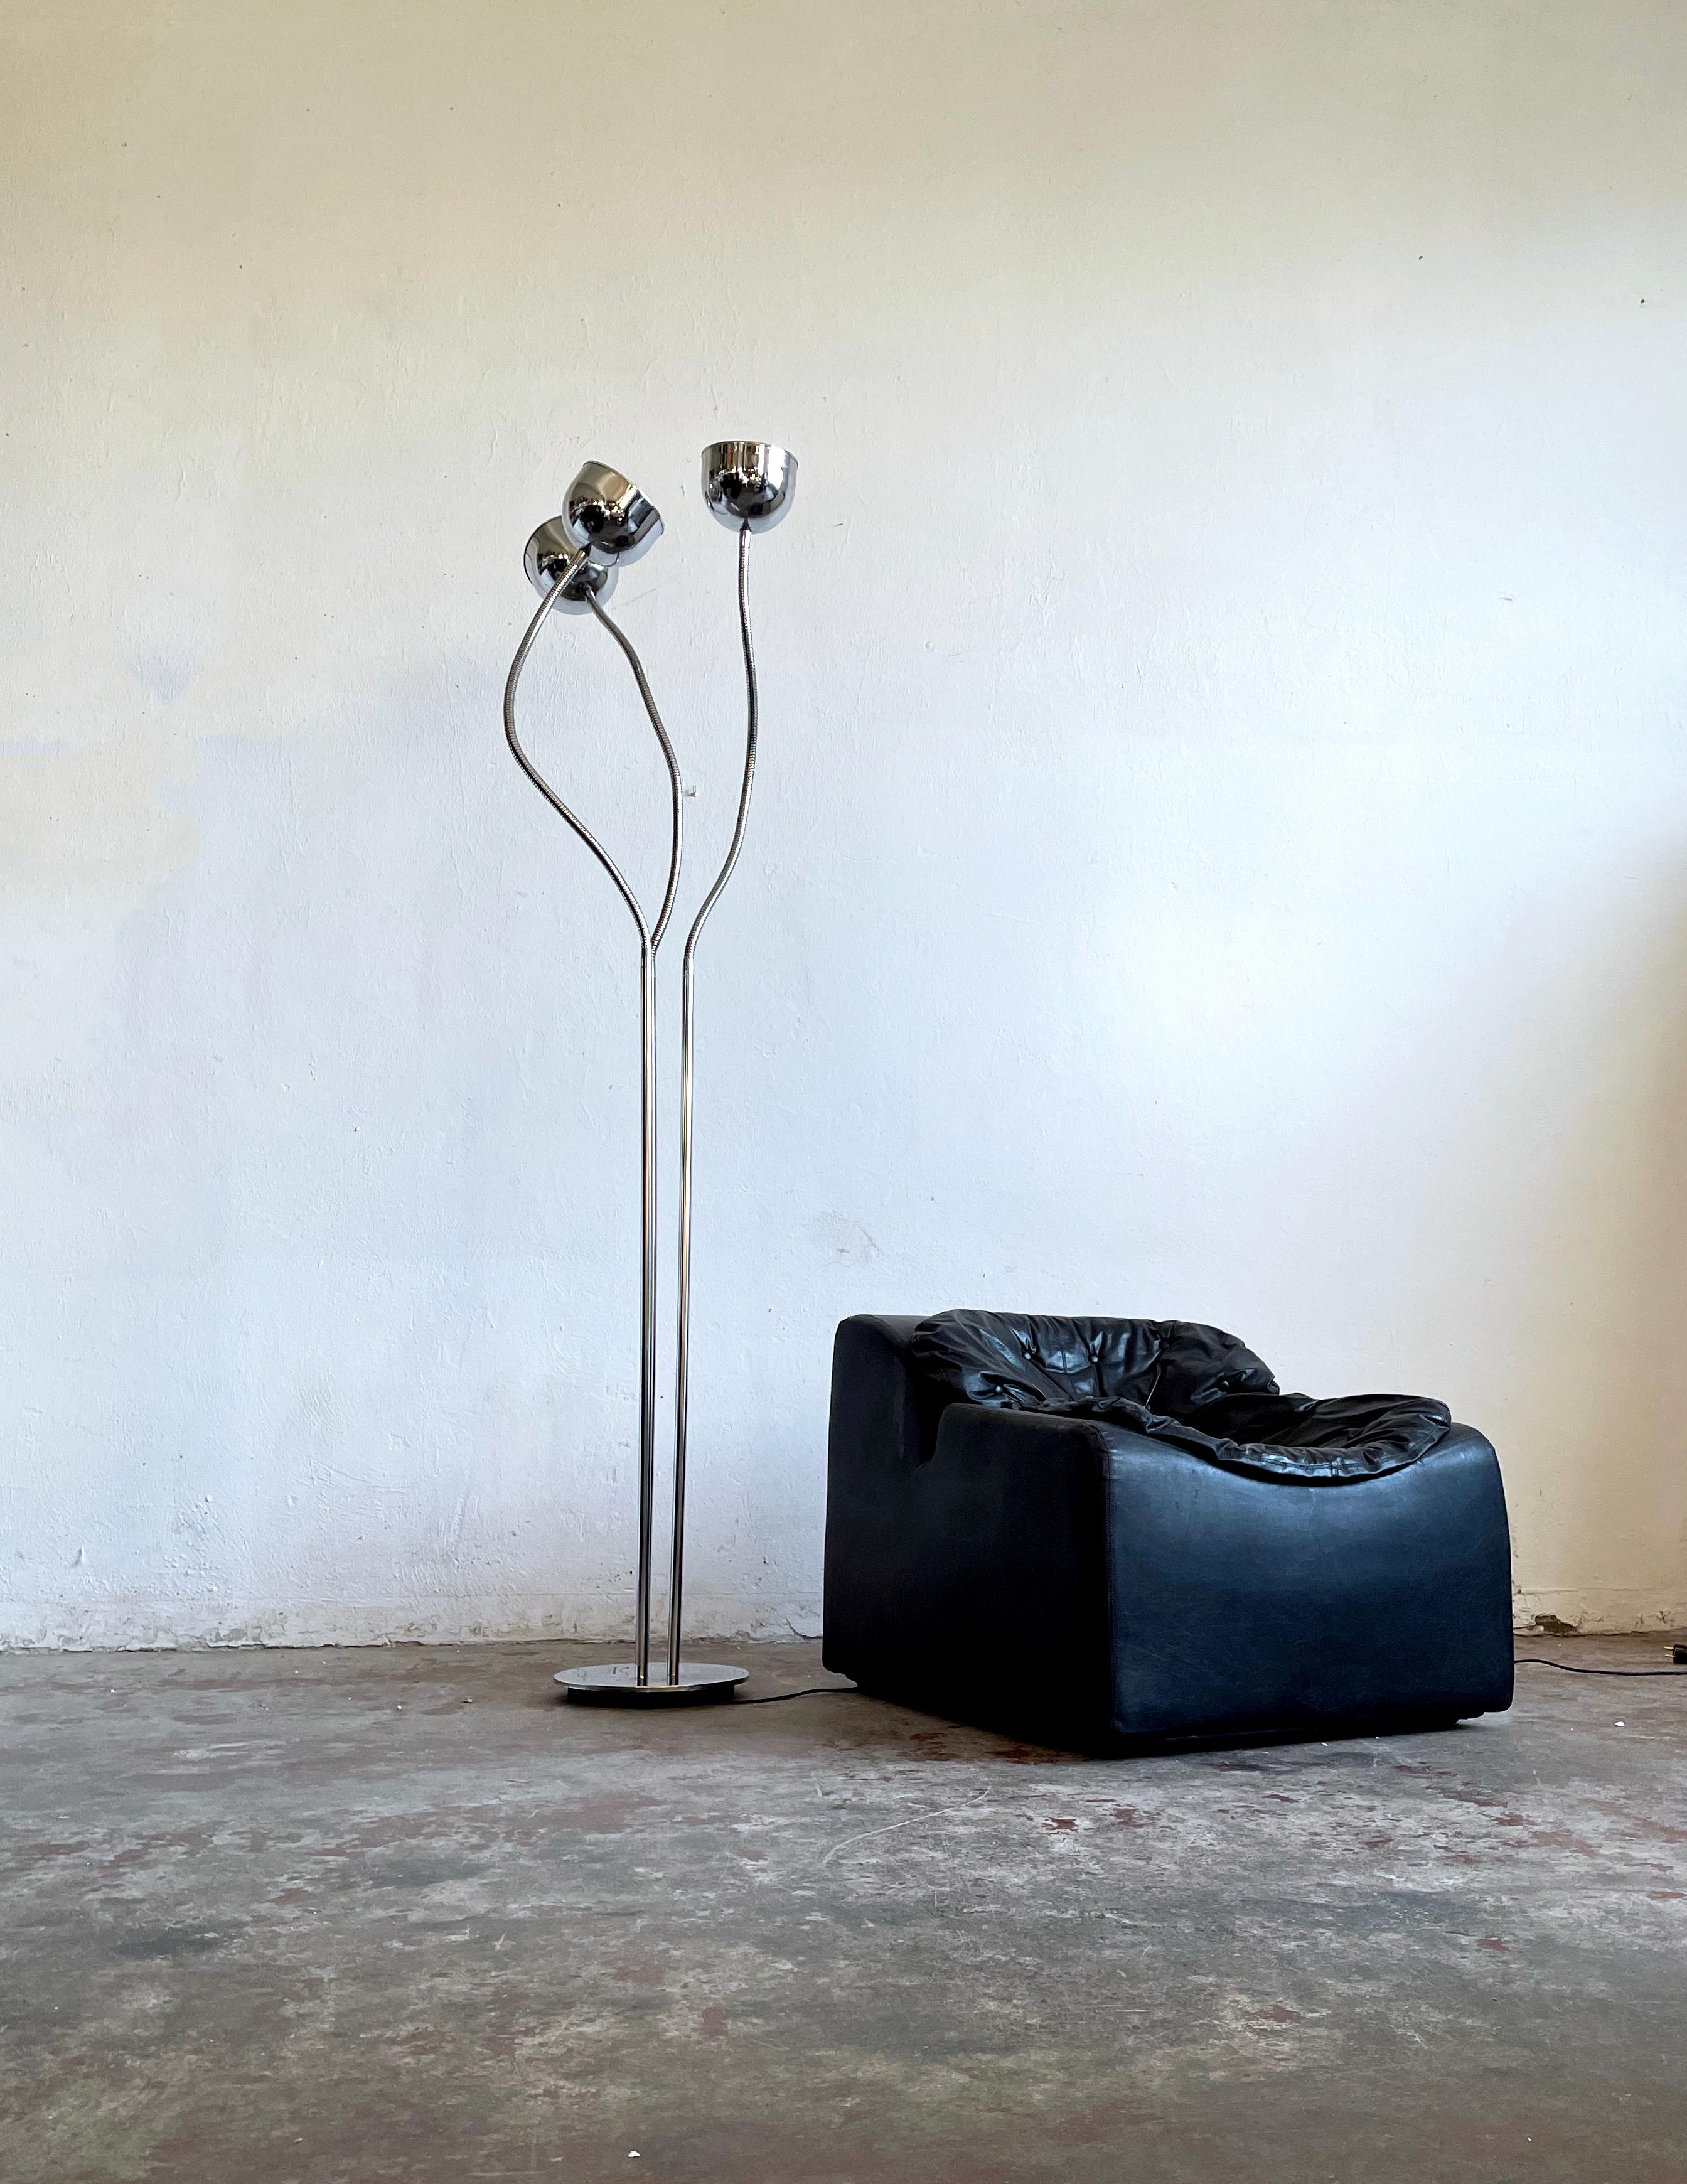 Large space-age Italian floor lamp featuring three adjustable arms

3x E27 lamp socket

Unknown designer and manufacturer

The lamp is made of chromed metal. The lamp base has a very heavy cast iron core

The lamp is in a fully functional